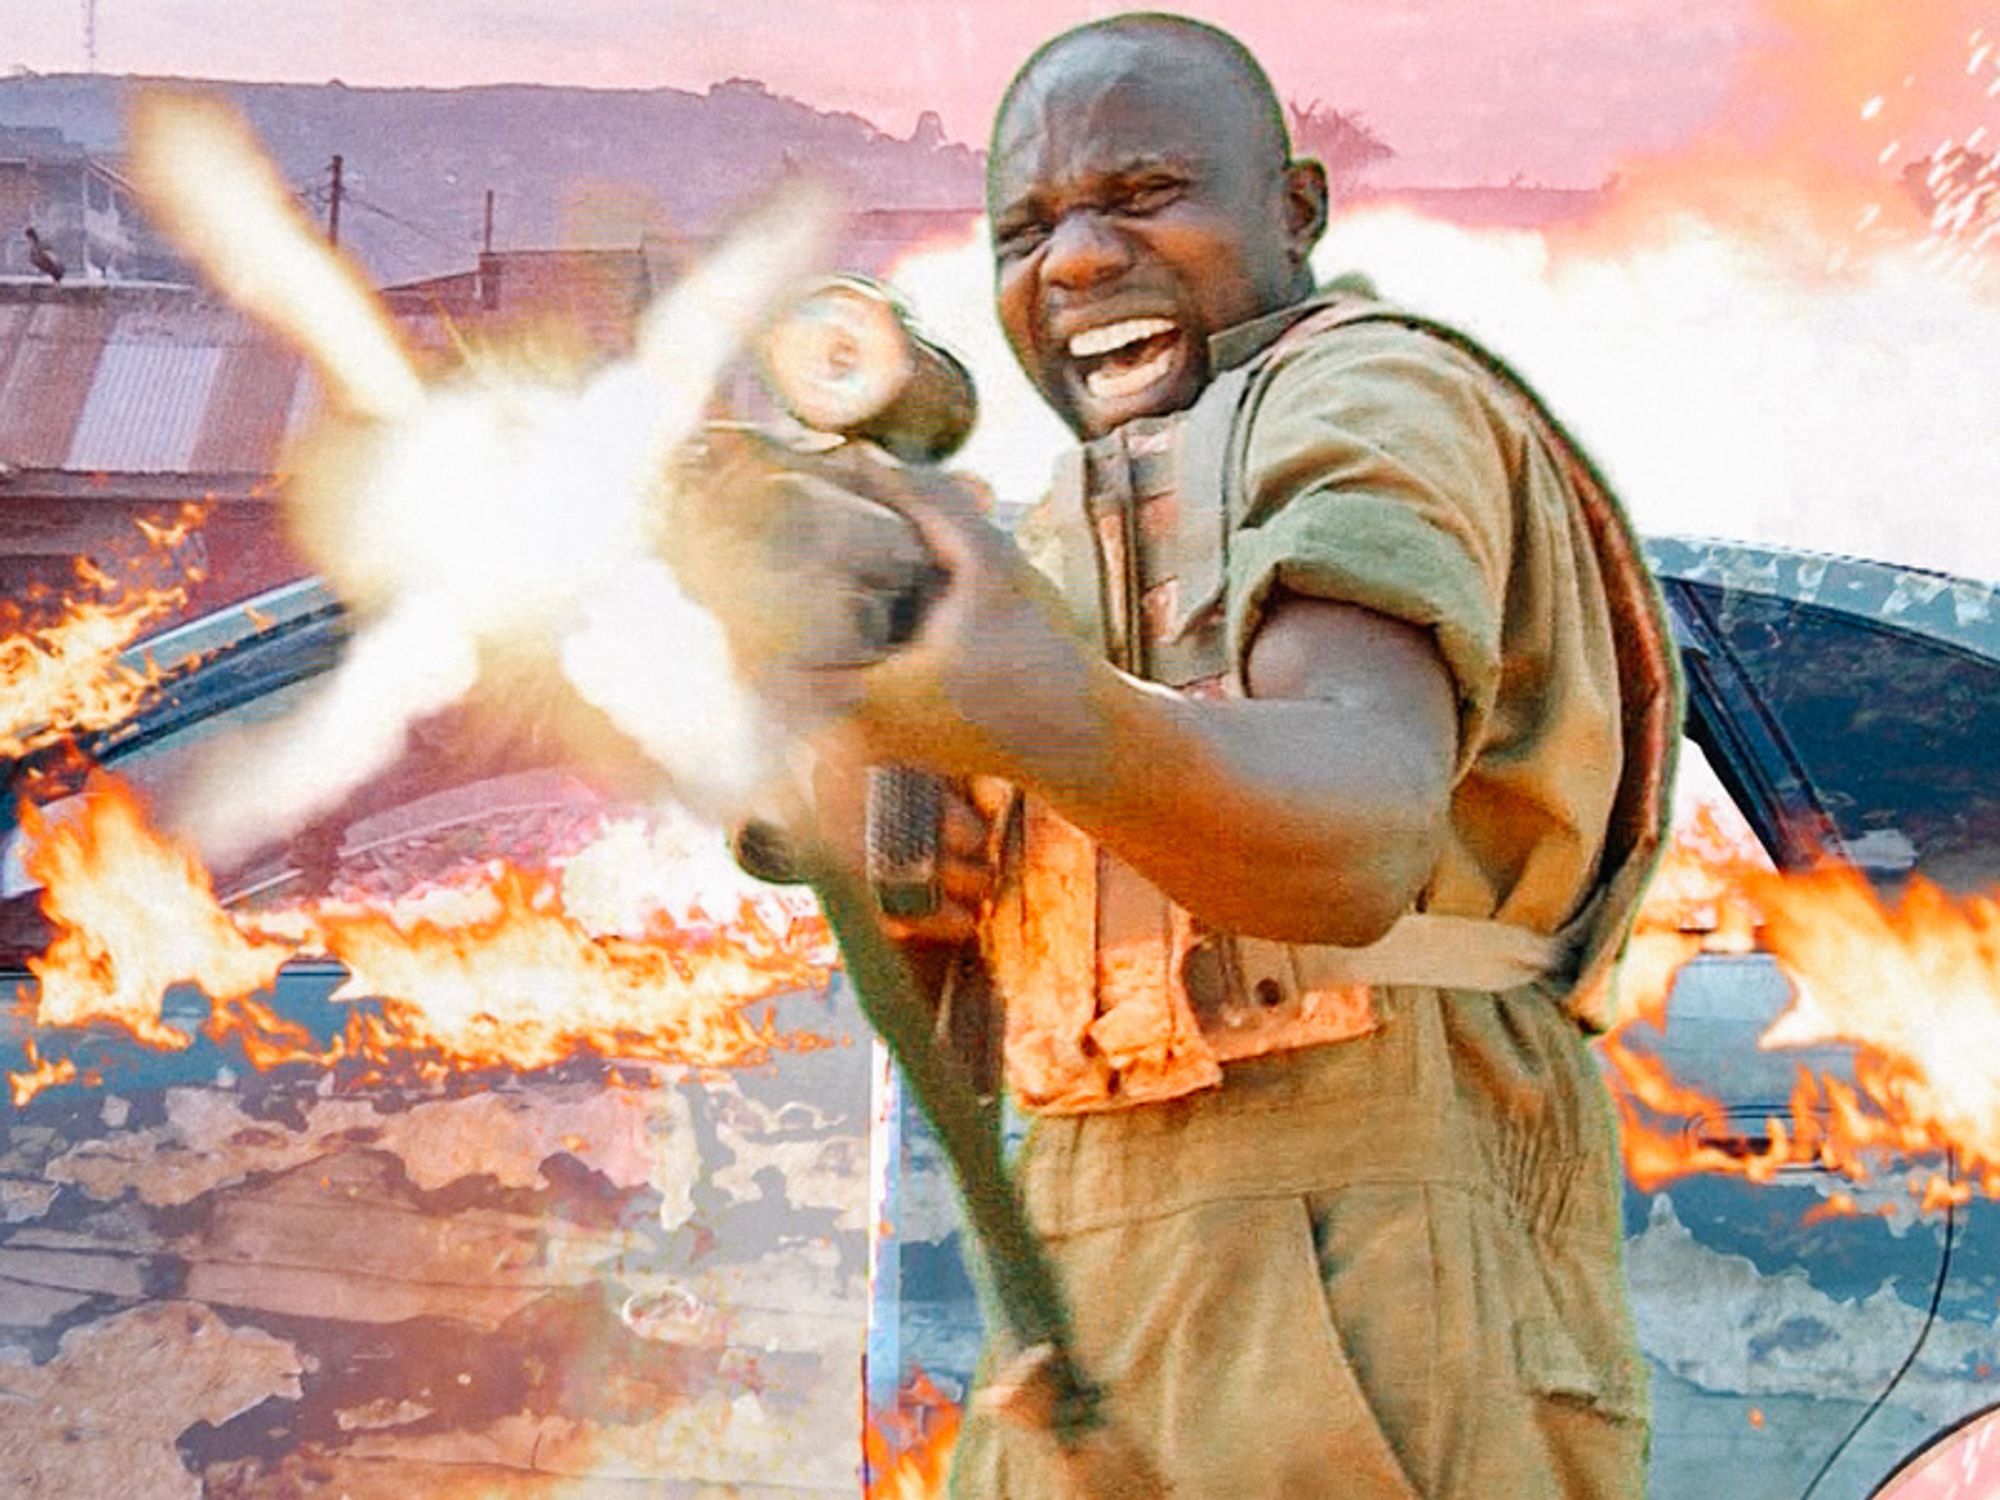 'Crazy World' is the Ugandan Action Film Poised to Bring Wakaliwood to the World